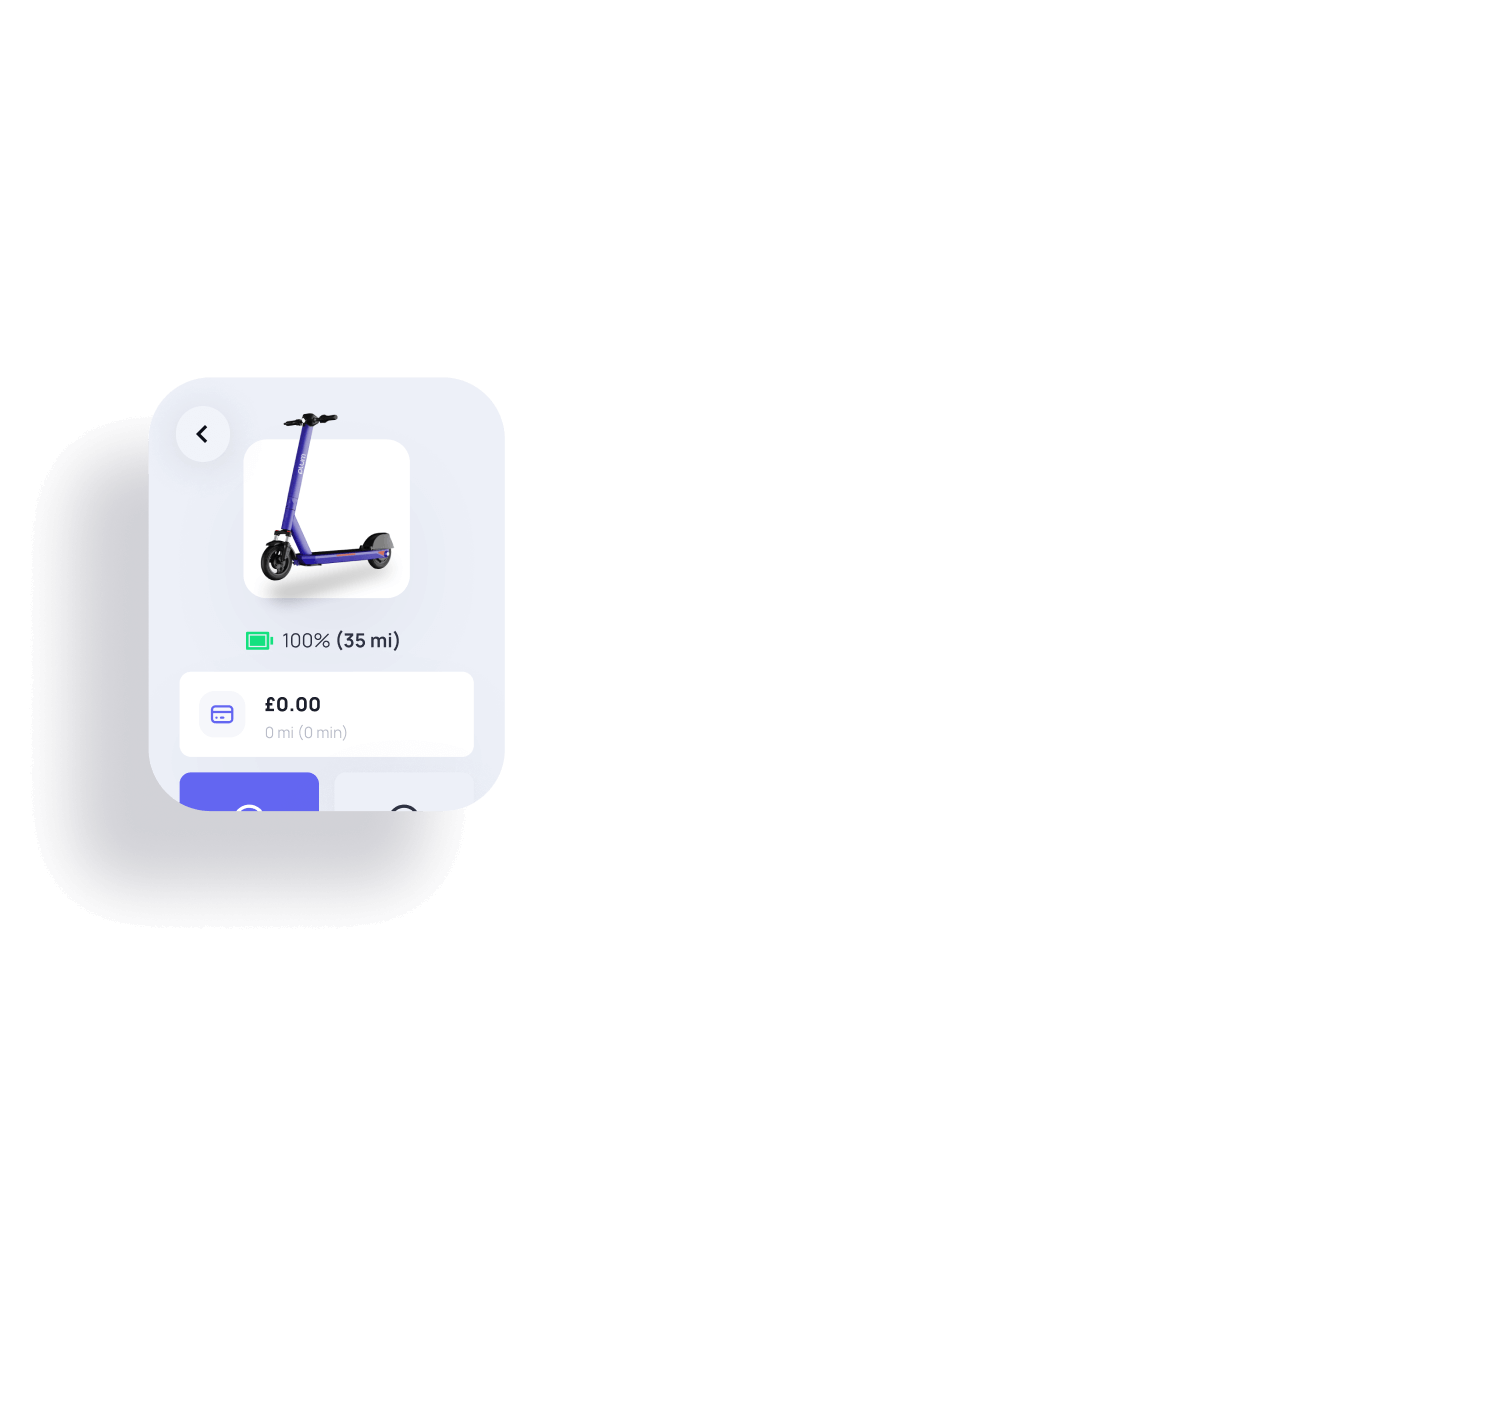 Snippet of Plum rider app with an e-scooter image, battery charge, and ride fare